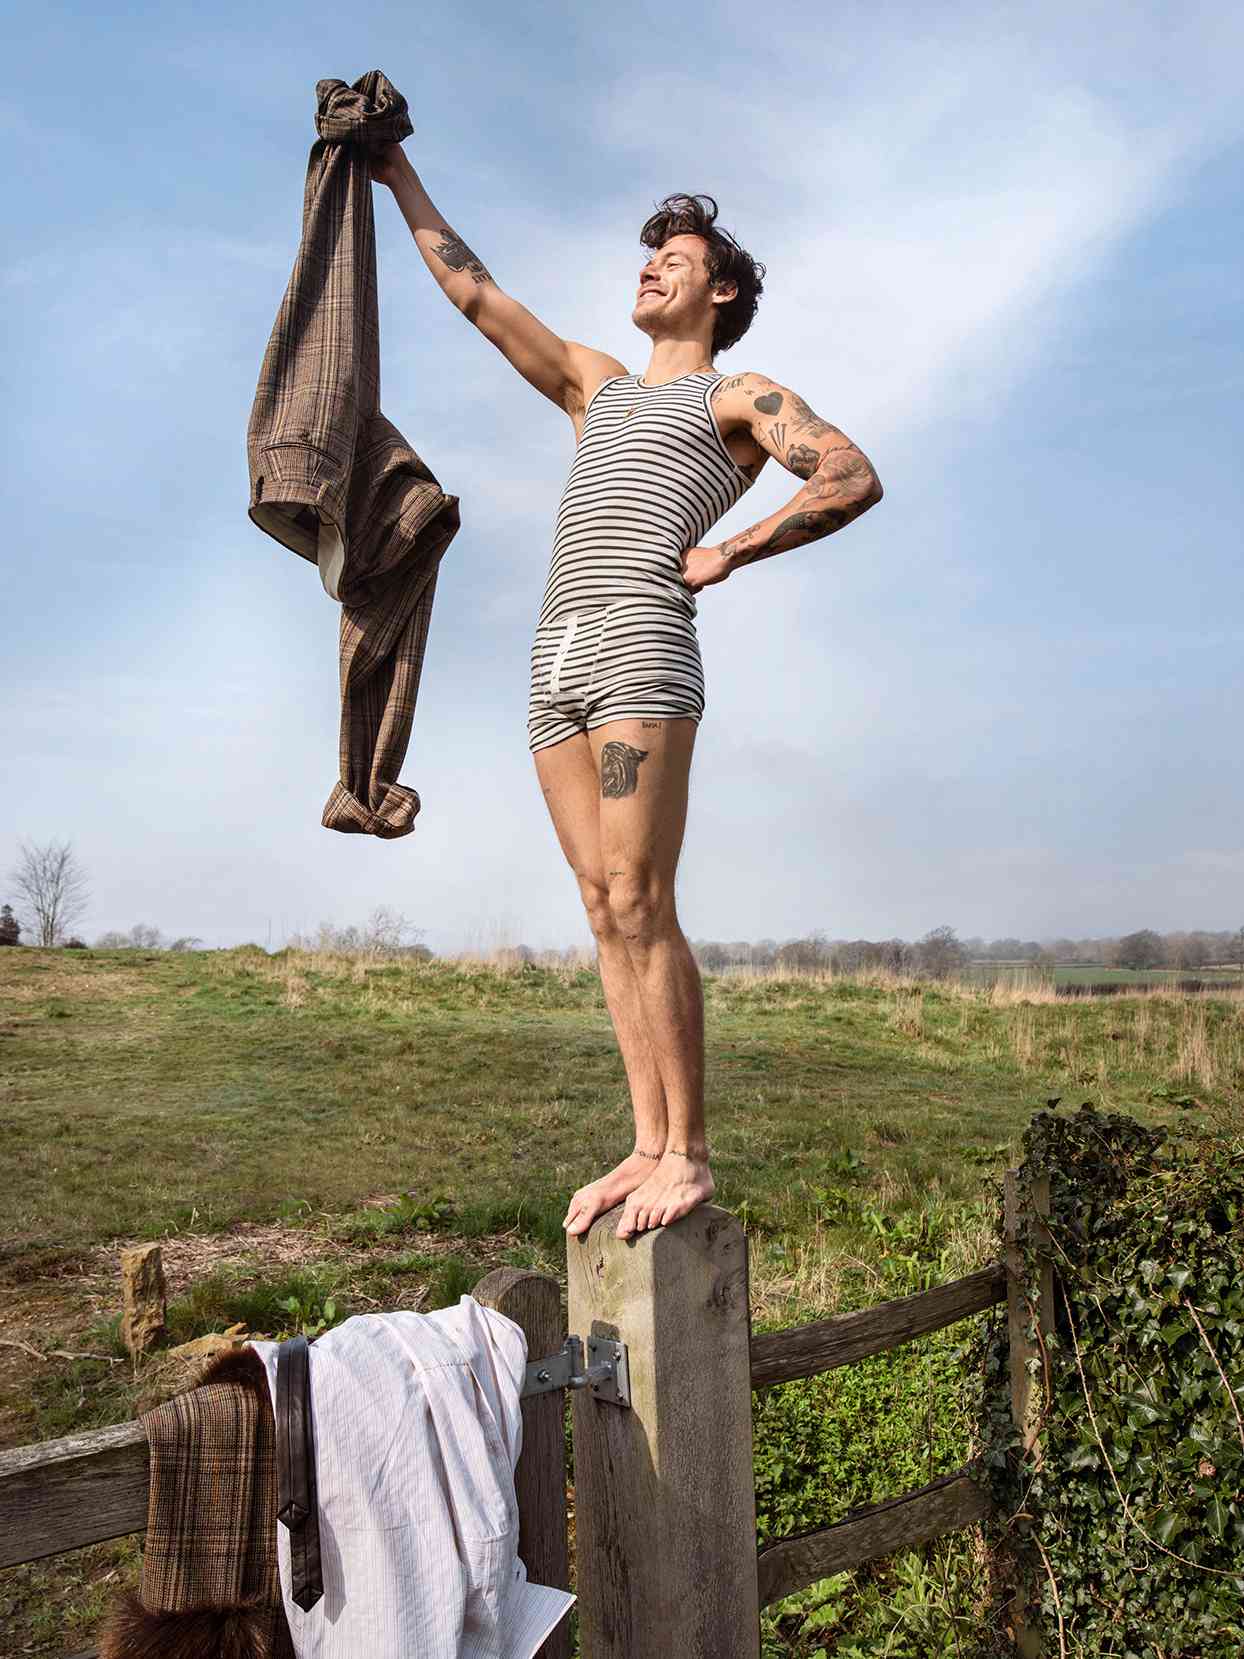 Photograph of Harry Styles standing on fence post